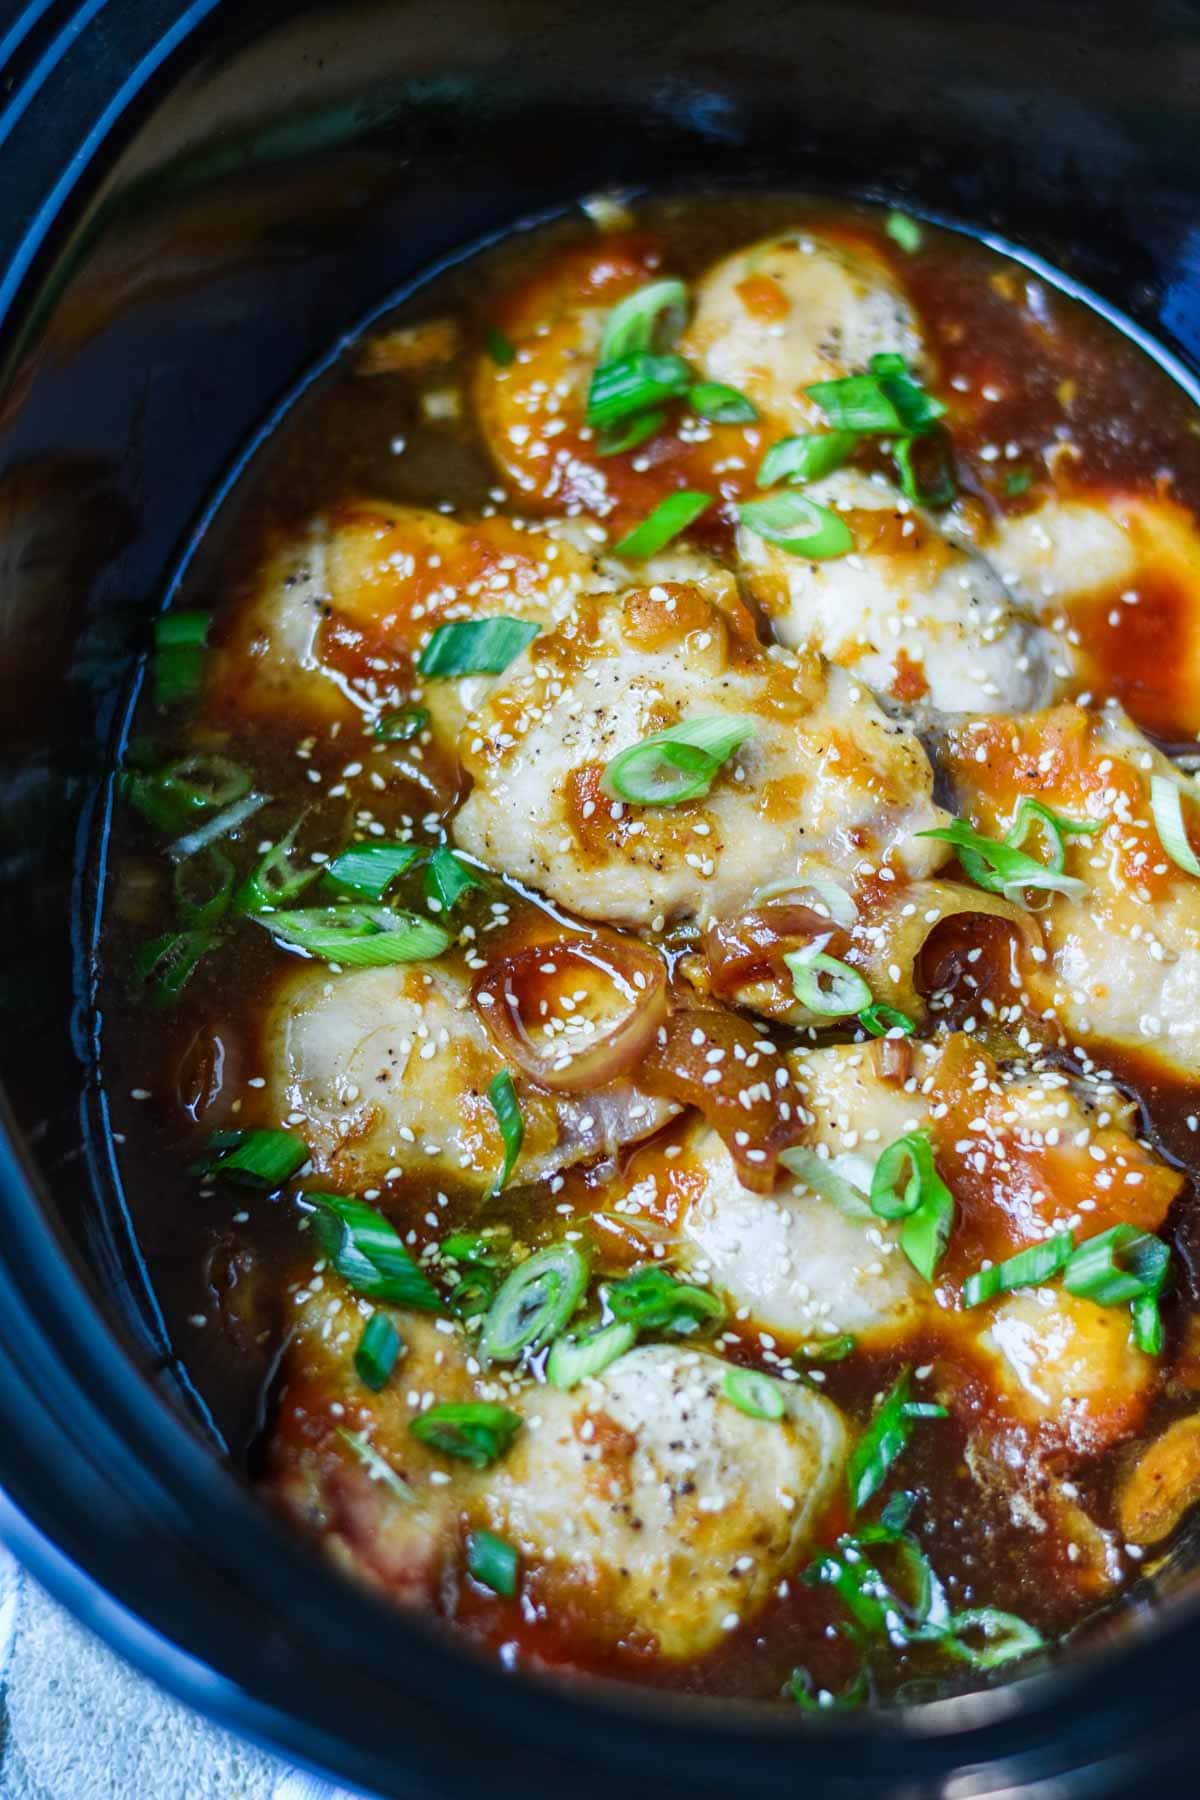 Close up image showing crockpot full of apricot chicken.